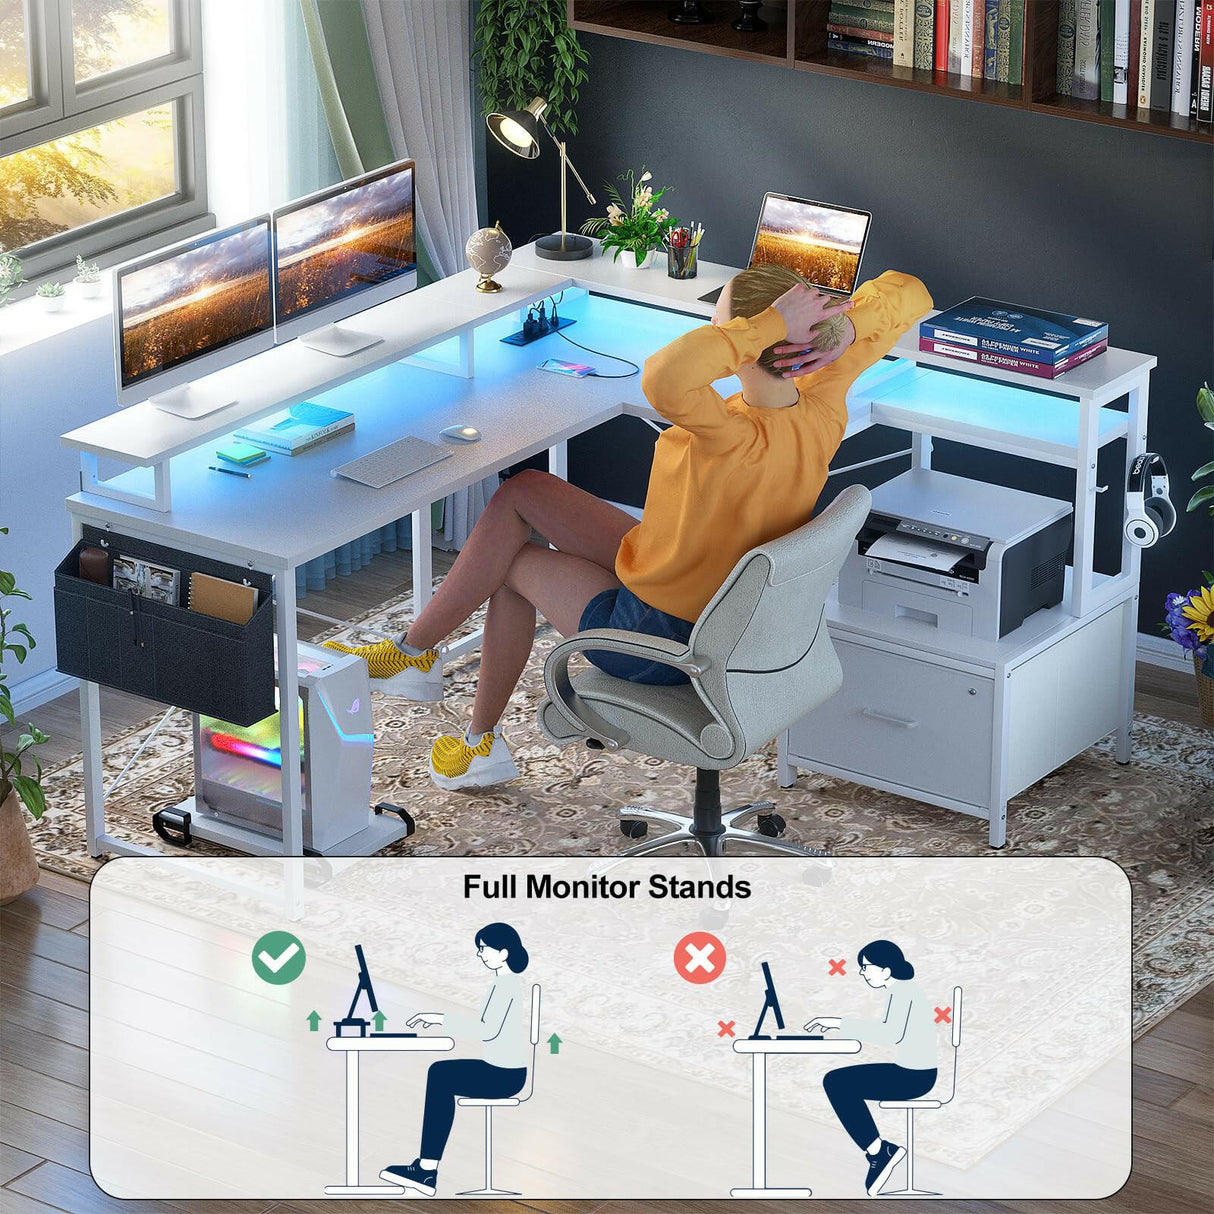 Unikito L Shaped Desk with Power Outlet and LED Strip, Reversible L Shaped Computer Desk with File Drawer, Corner Desk for Gaming Writing, Home Office Desk with Monitor Shelf